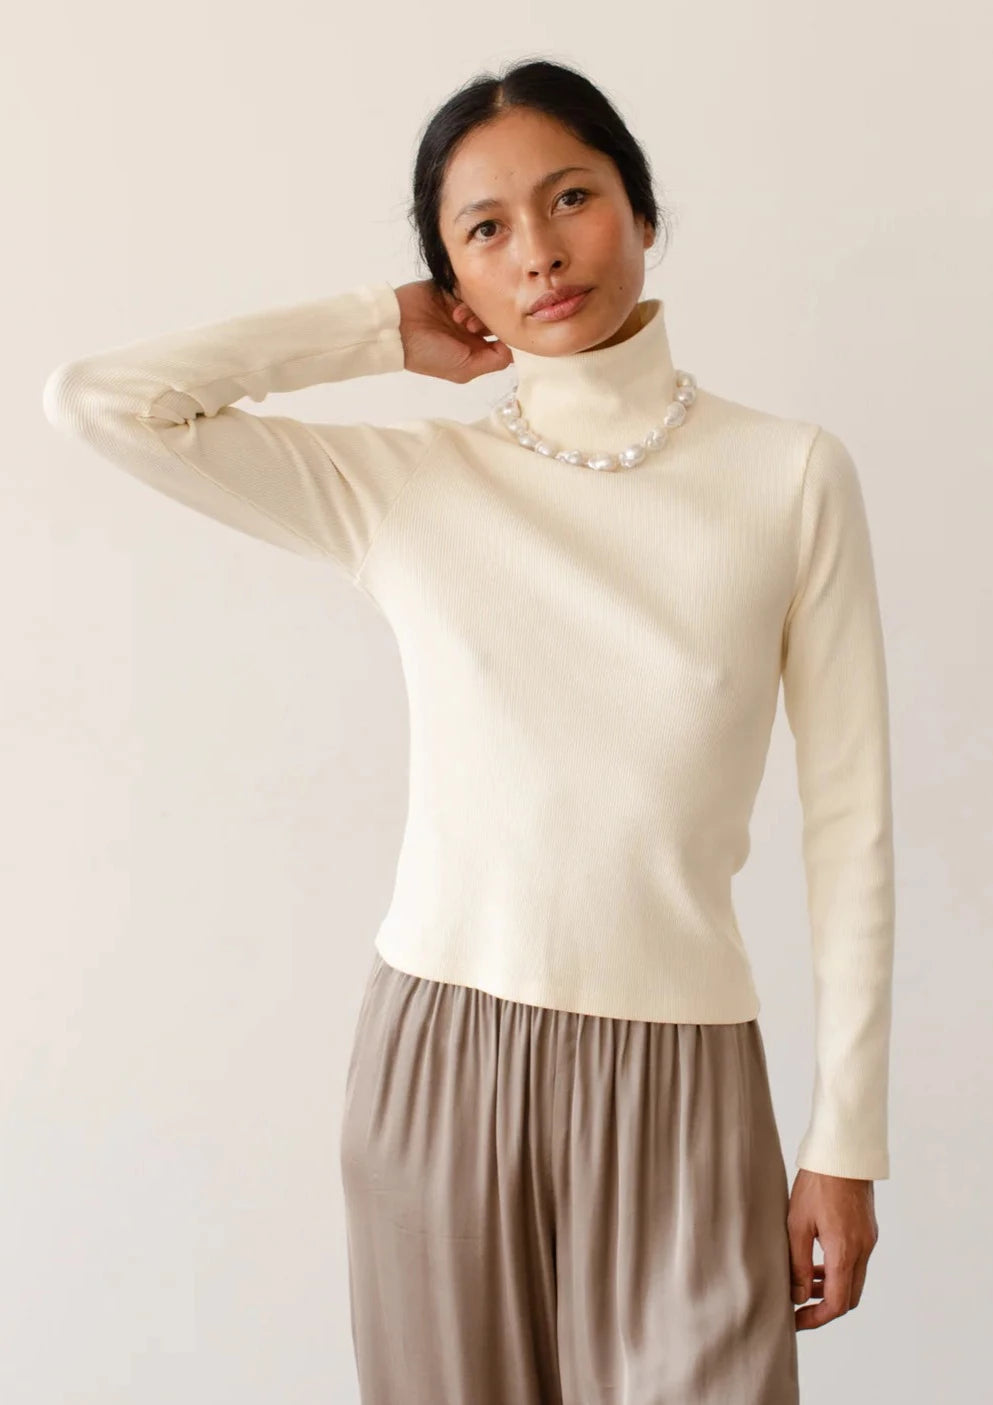 A medium shot image of a female model posing with an arm up to her head while wearing the Rib Turtleneck in Cream styled with a taupe trouser and pearl necklace